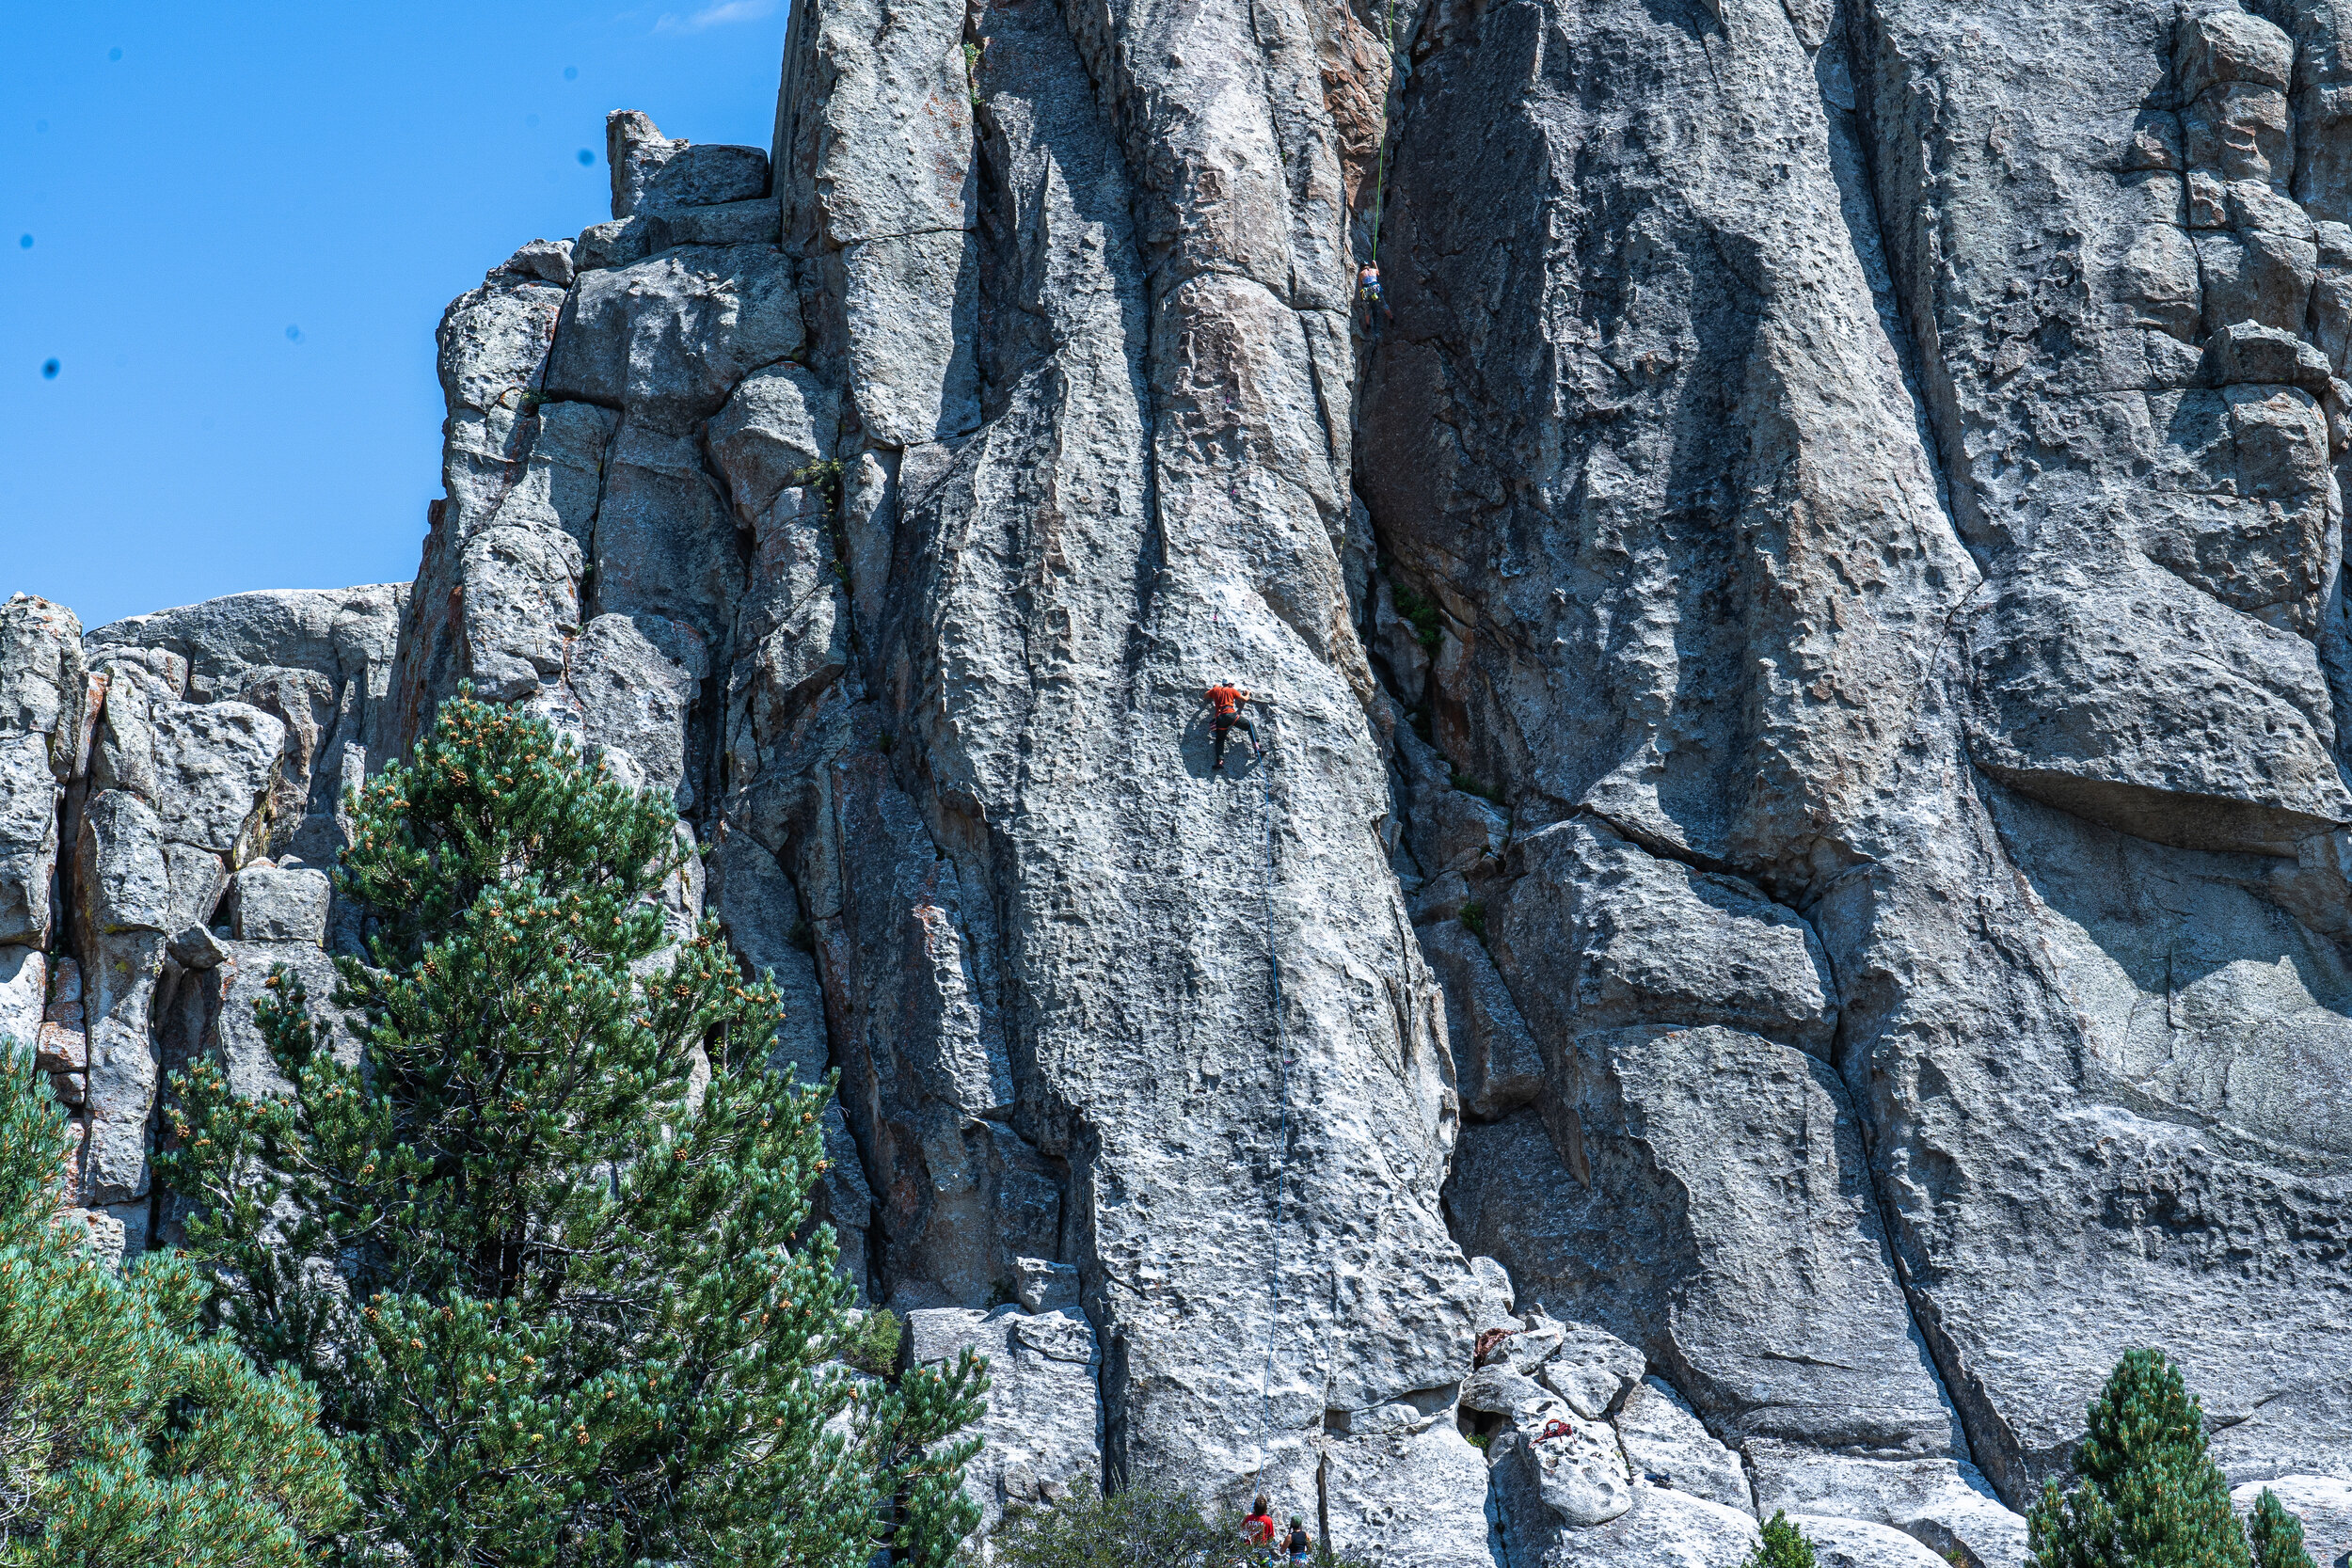  The rock climbers were also enjoying the day at City of Rocks. 